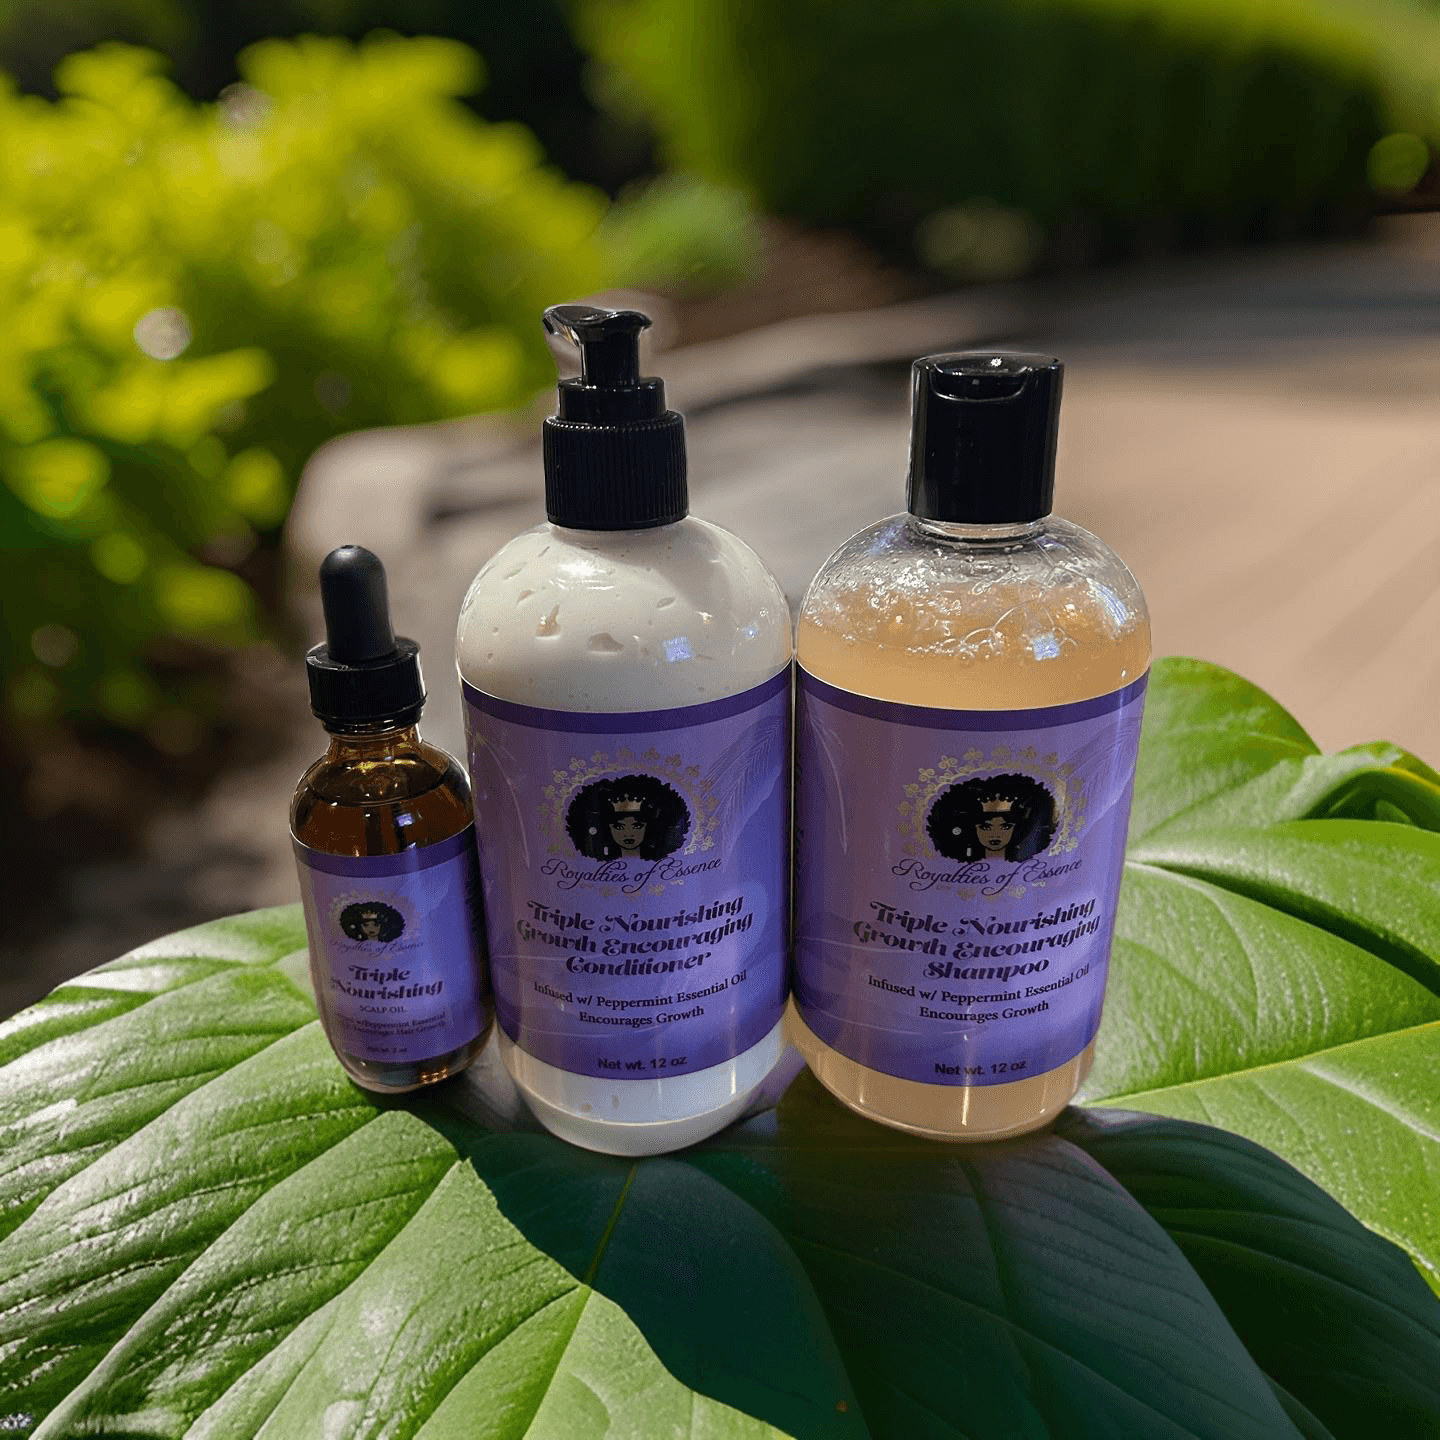 Triple Nourishing Collection. This all-in-one package includes everything you need for healthier, stronger, longer, softer and more moisturized hair.